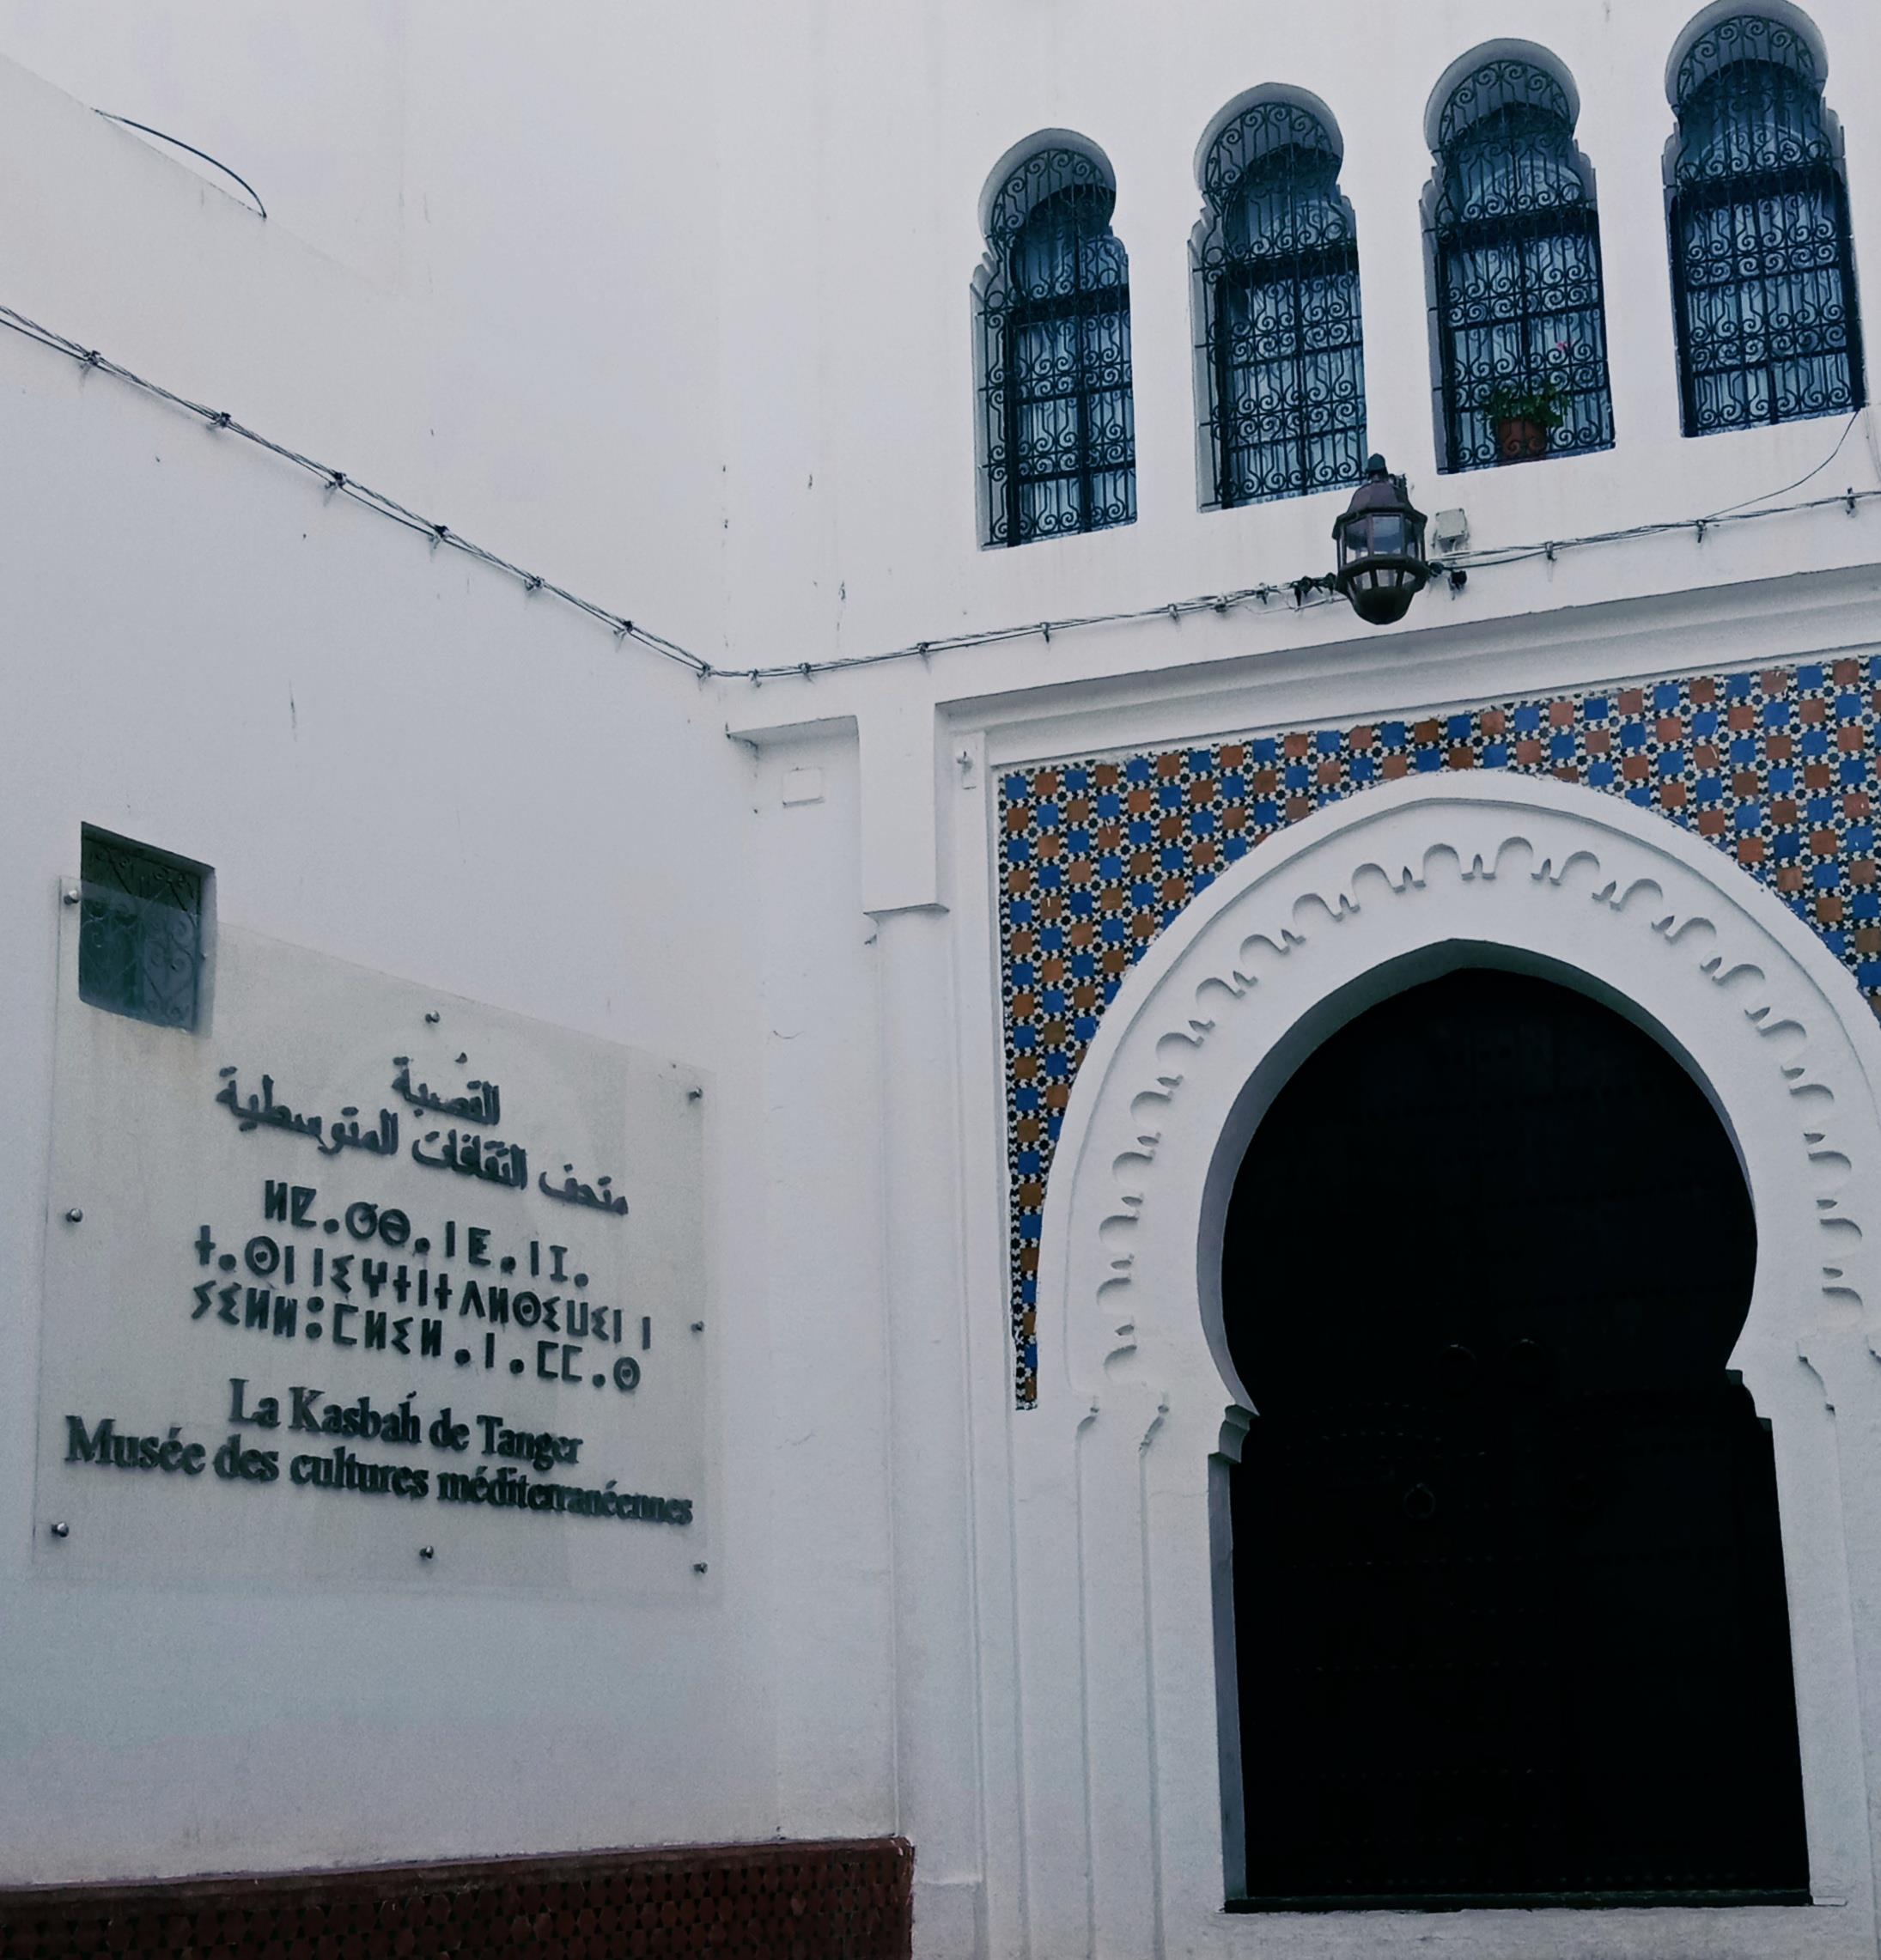 Free tour of the main monuments of Tangier